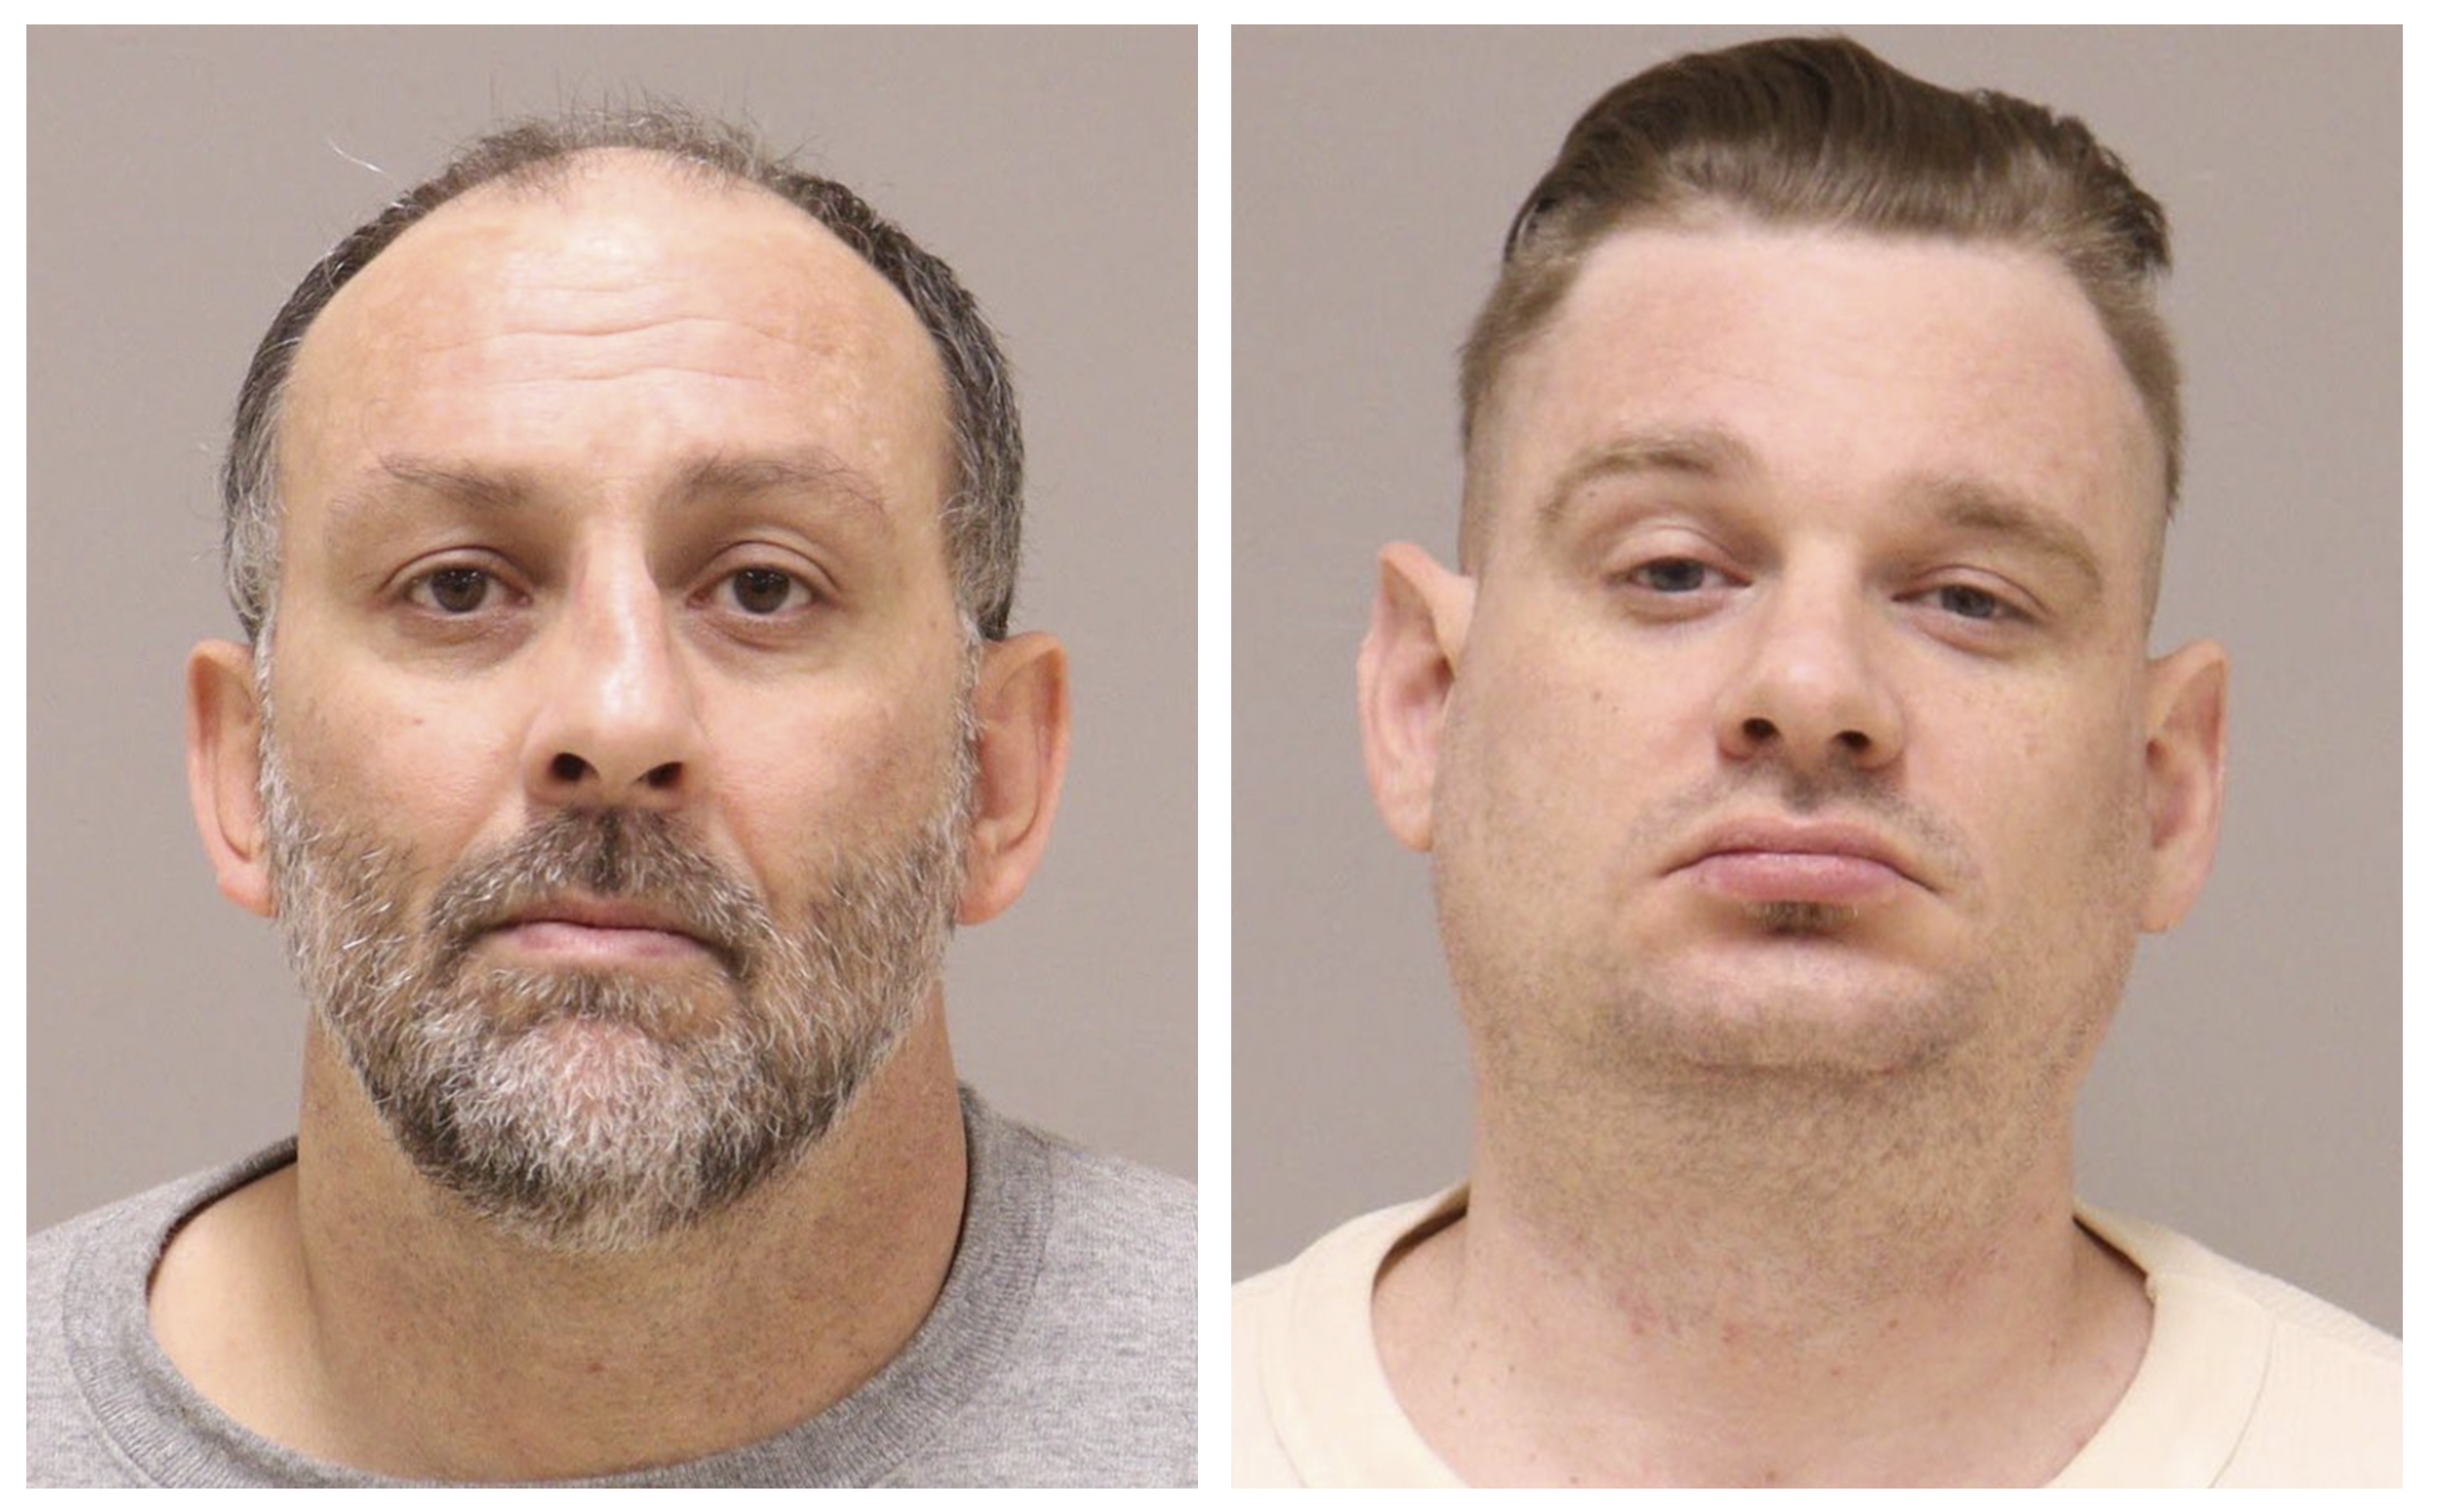 Barry Croft Jr., left, and Adam Fox, right, were convicted of conspiring to kidnap Michigan Gov. Gretchen Whitmer on Tuesday.